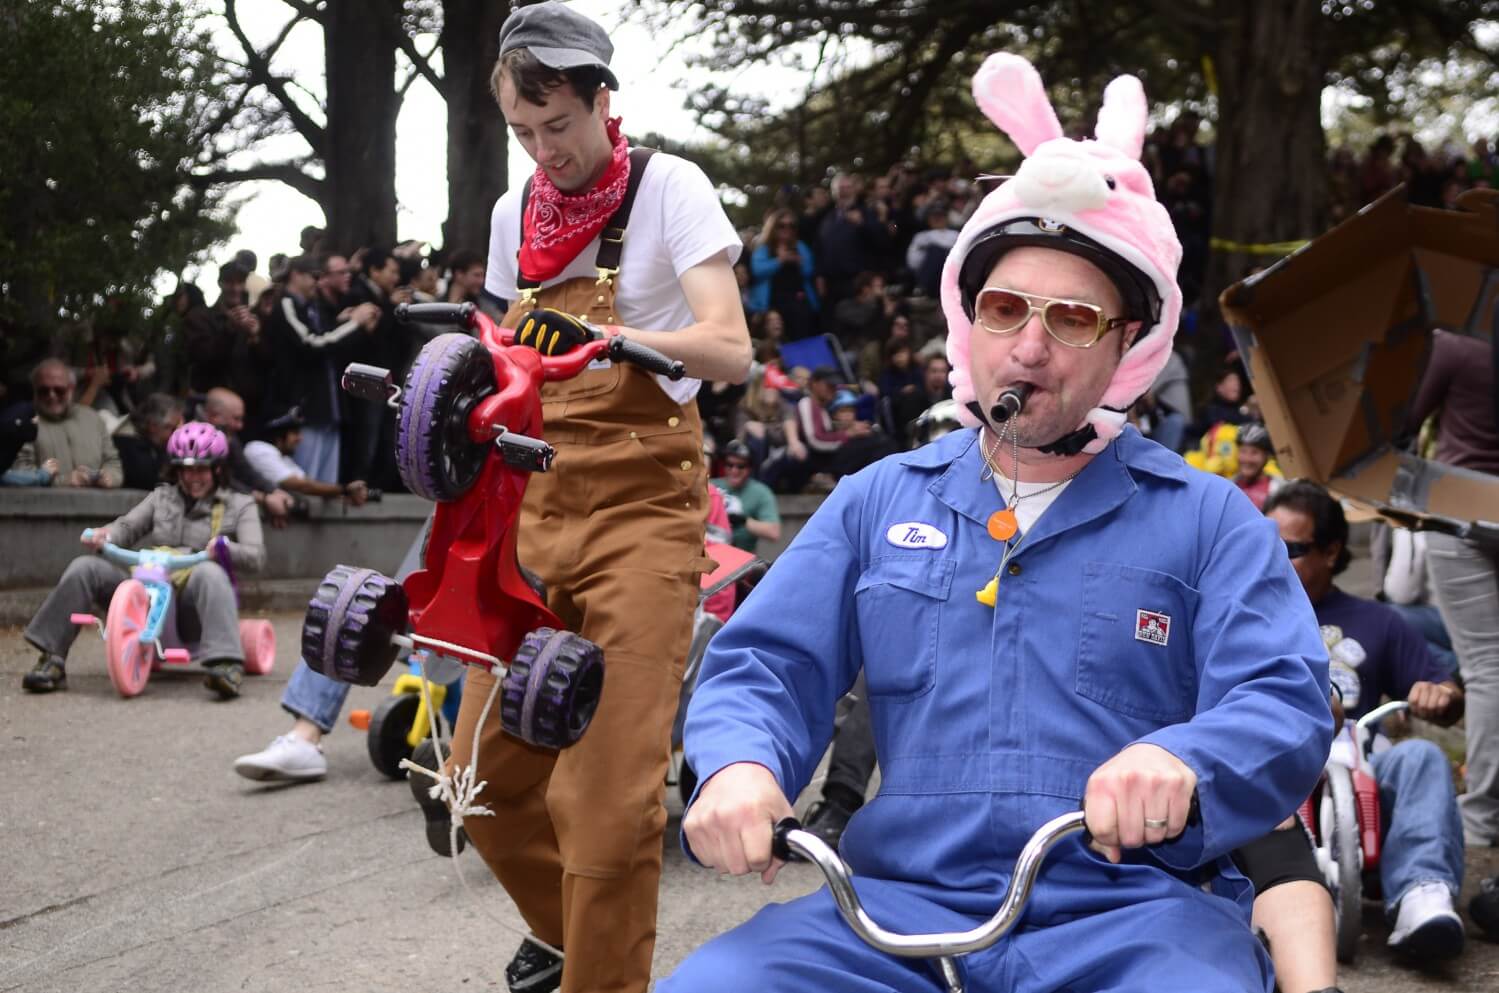 Adult participants go barreling down Vermont Street at the Bring Your Own Big Wheel race in Potrero Hill, April 8, 2012